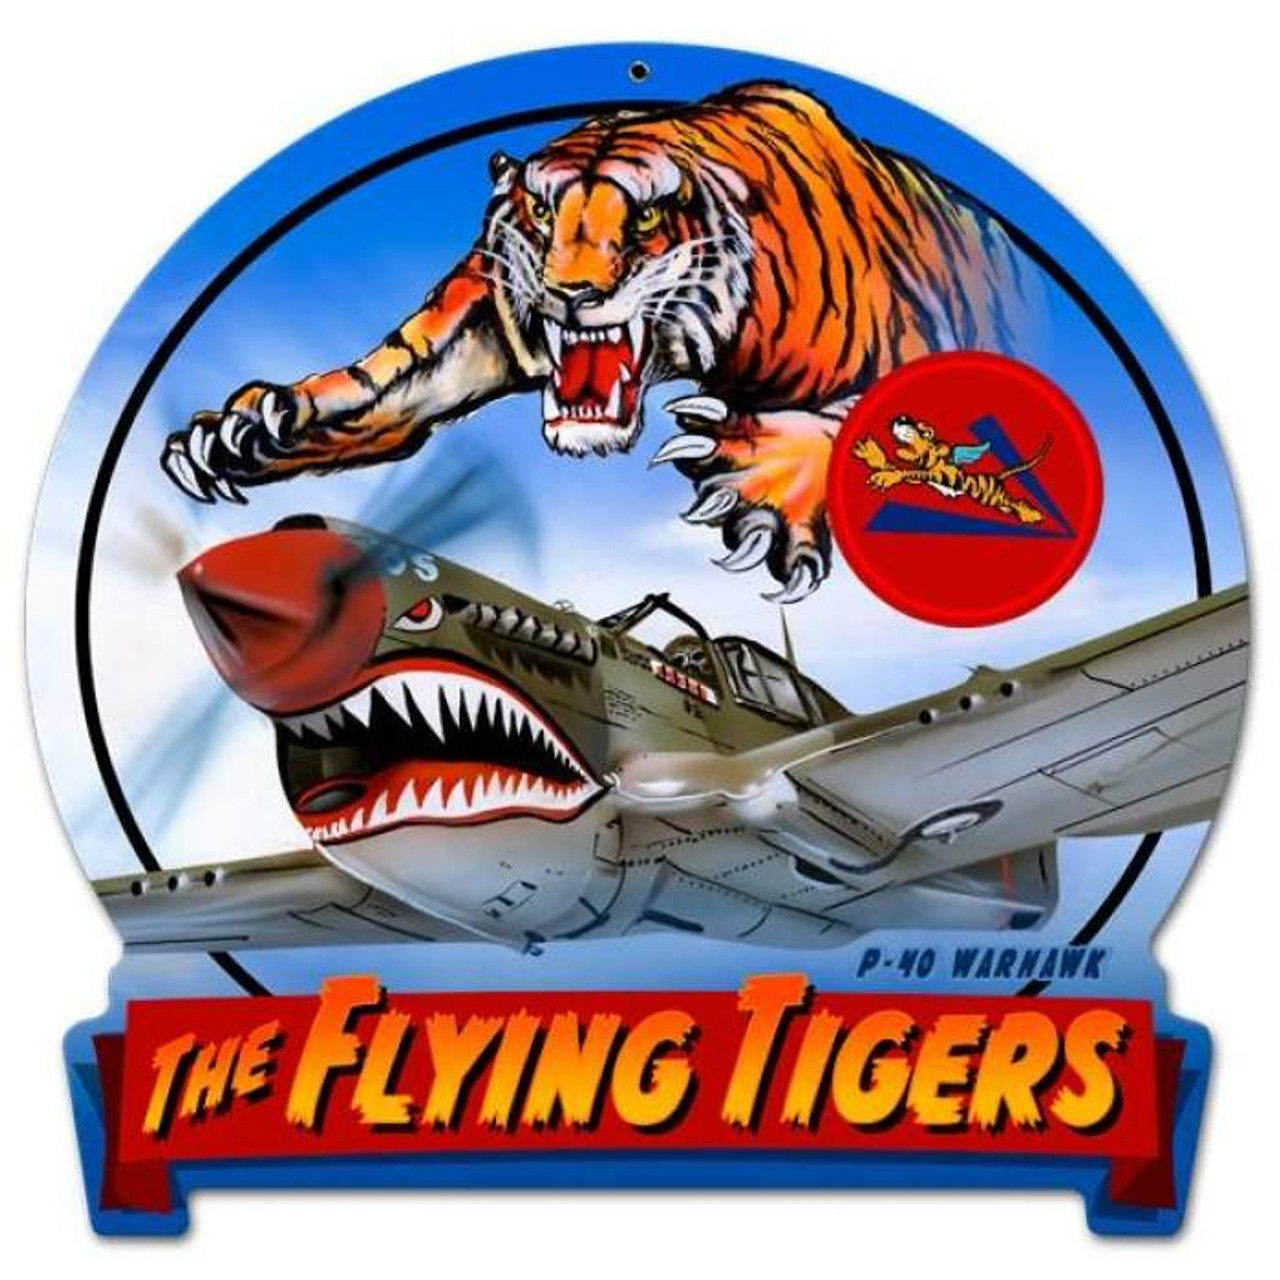 Retro Flying Tiger Round Banner Metal Sign 16 x 15 Inches